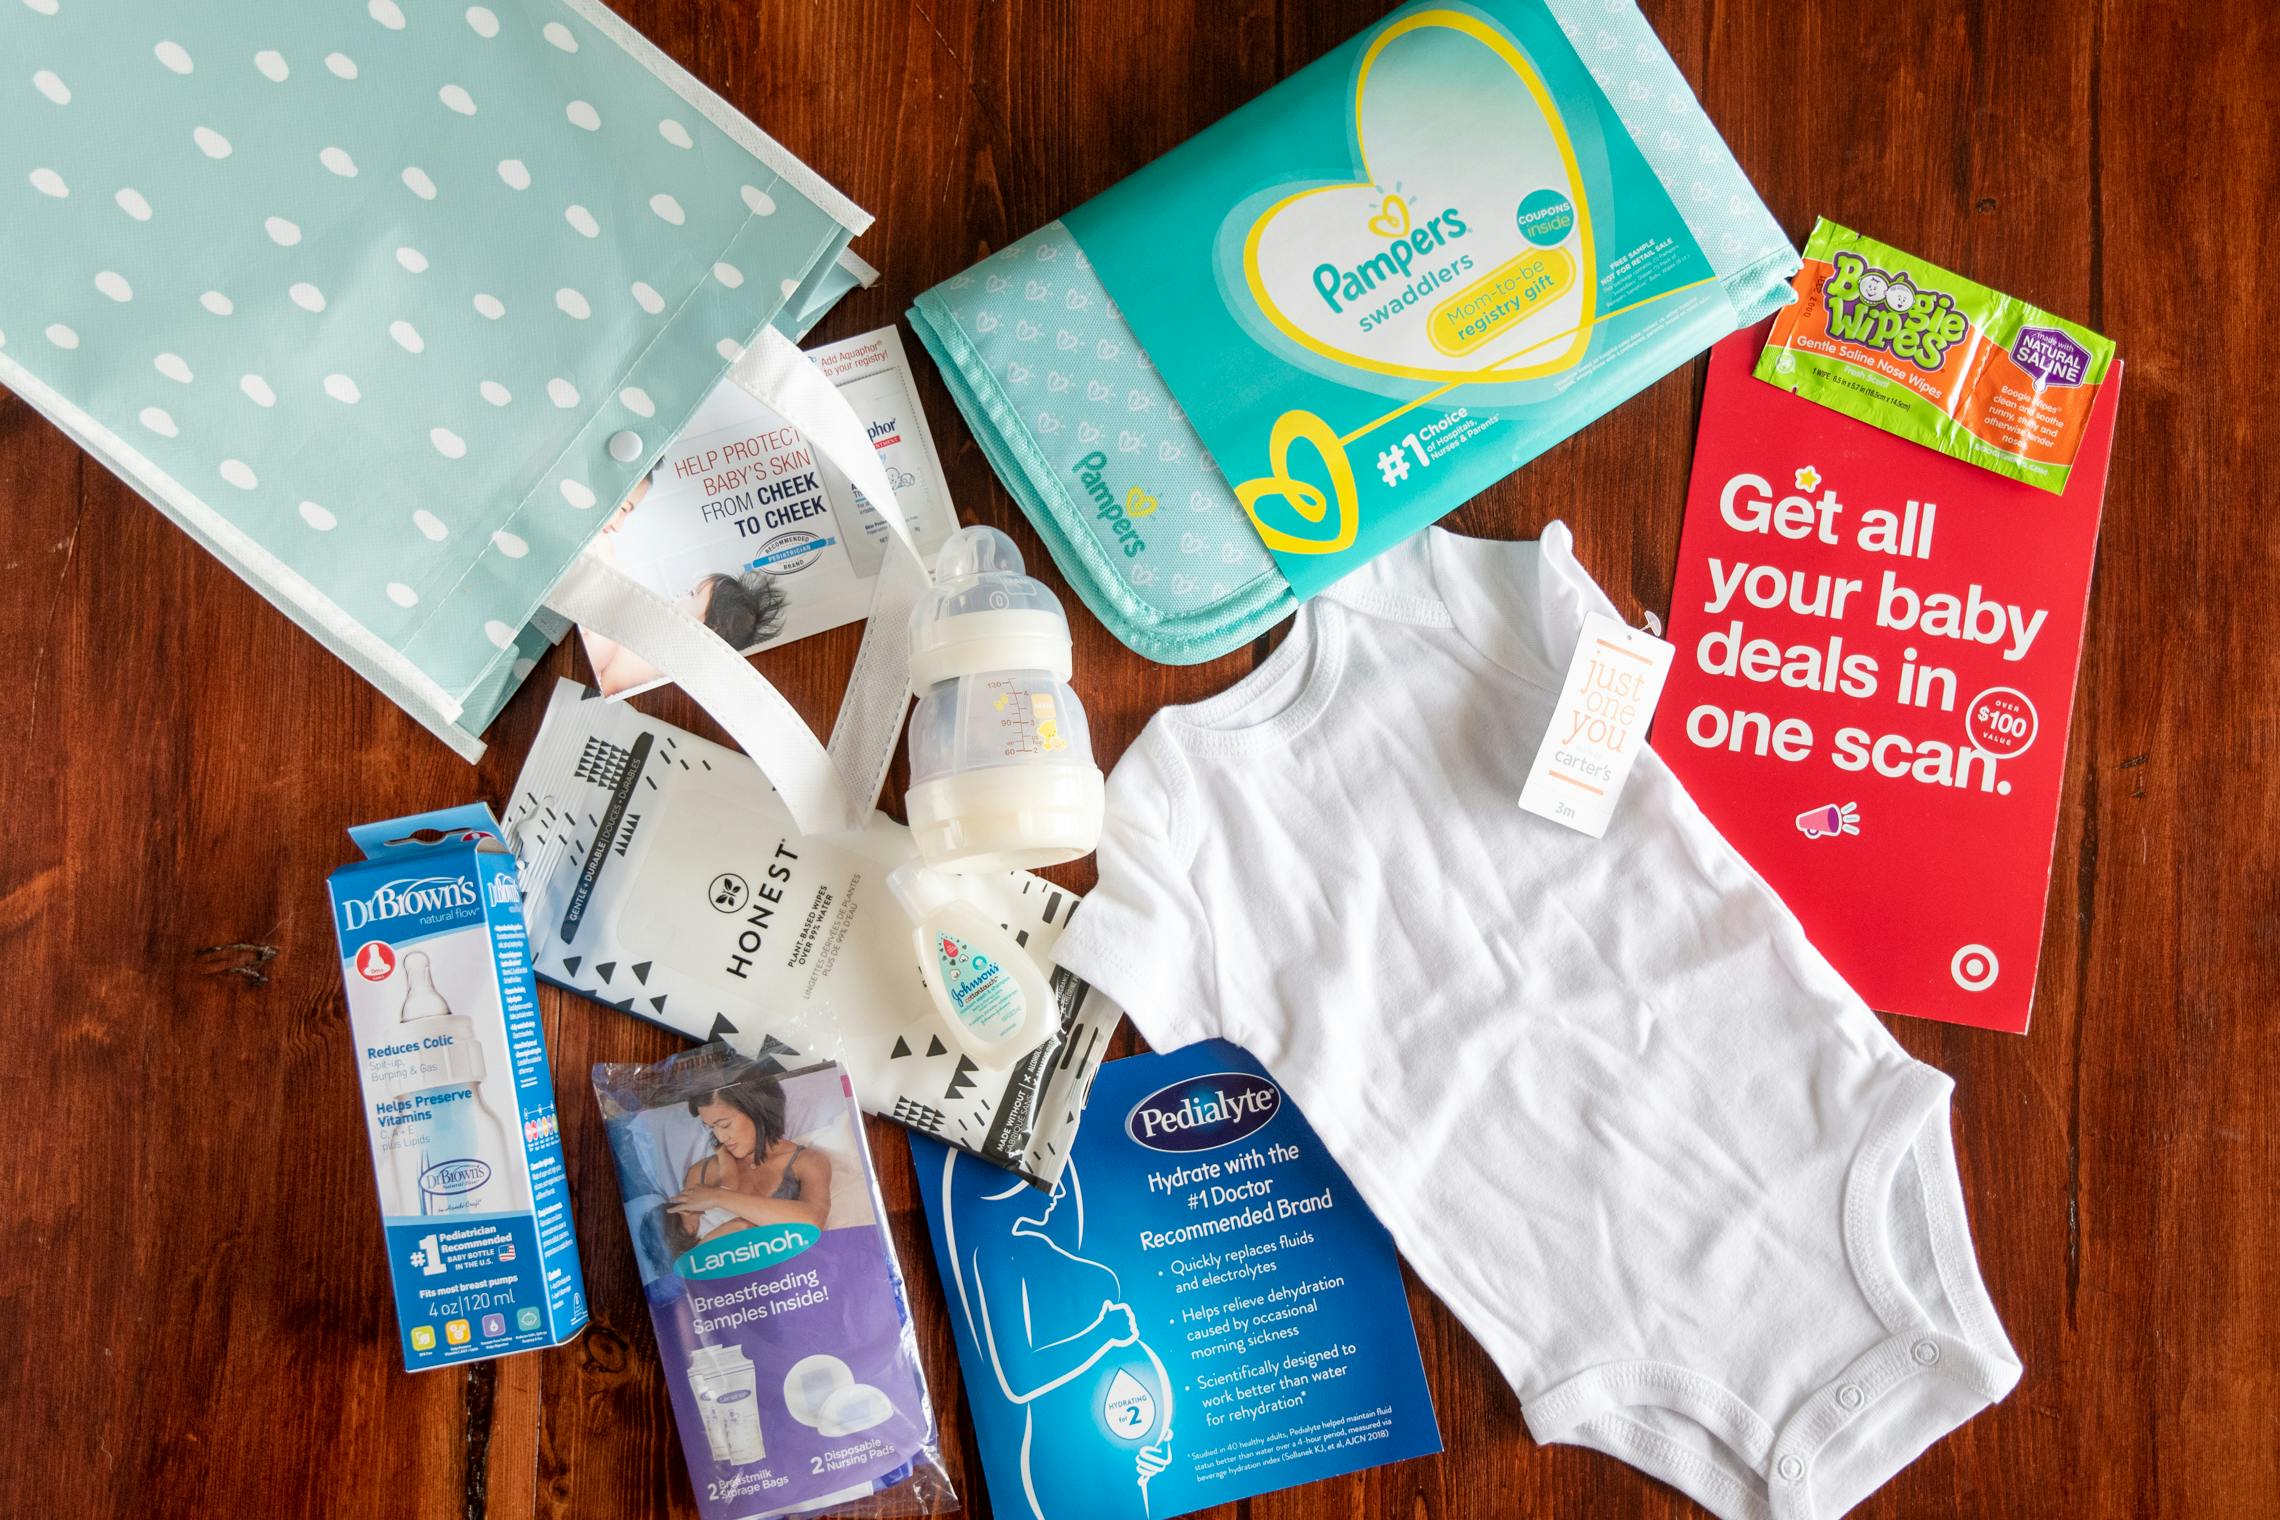 Baby products from a free Target baby registry welcome kit laid out on a wooden table.